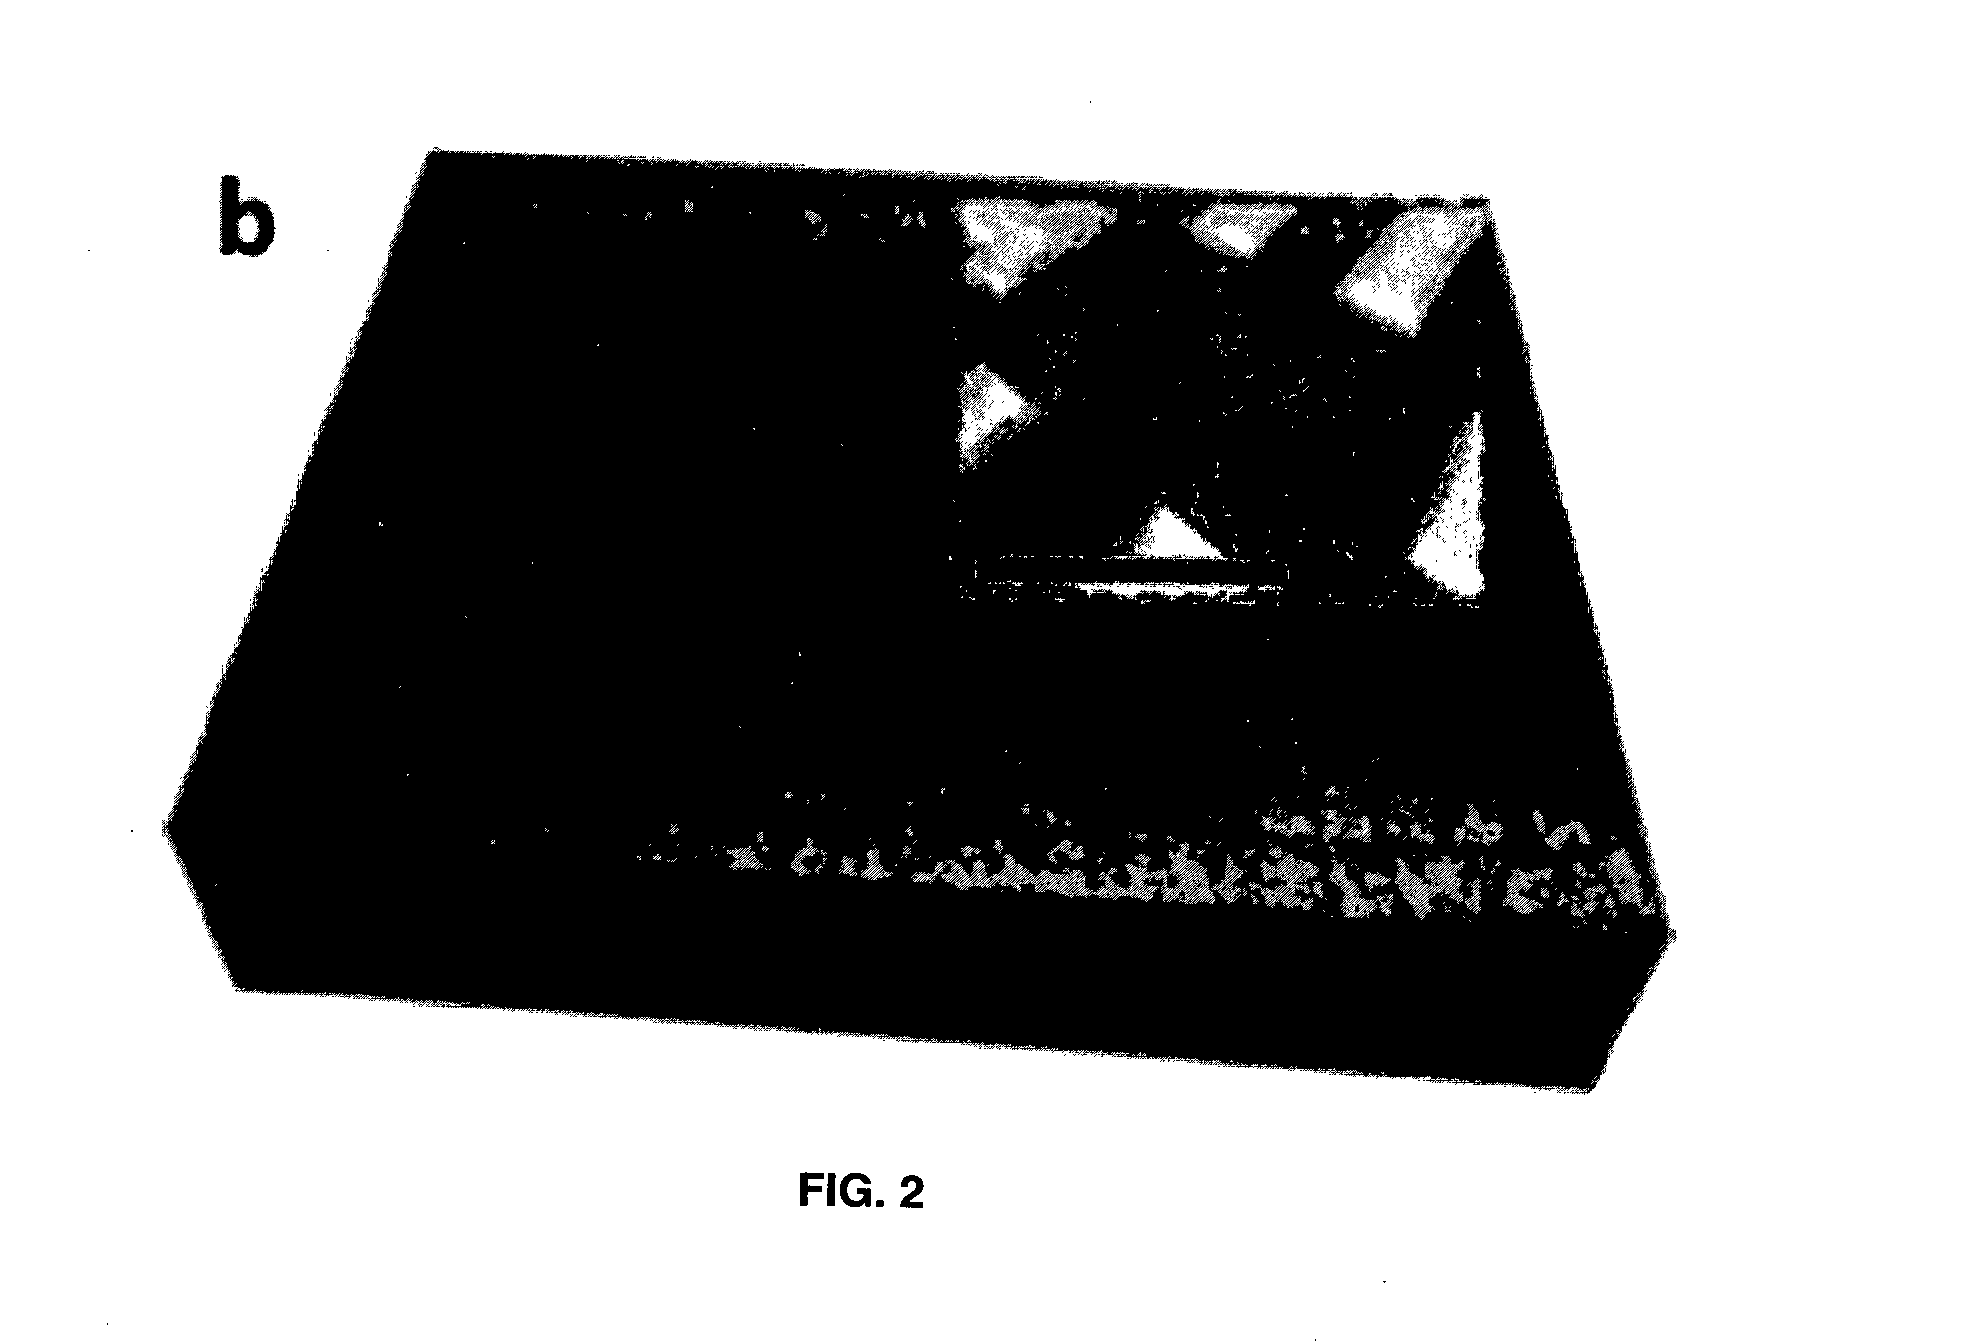 Graphene Ferroelectric Device and Opto-Electronic Control of Graphene Ferroelectric Memory Device